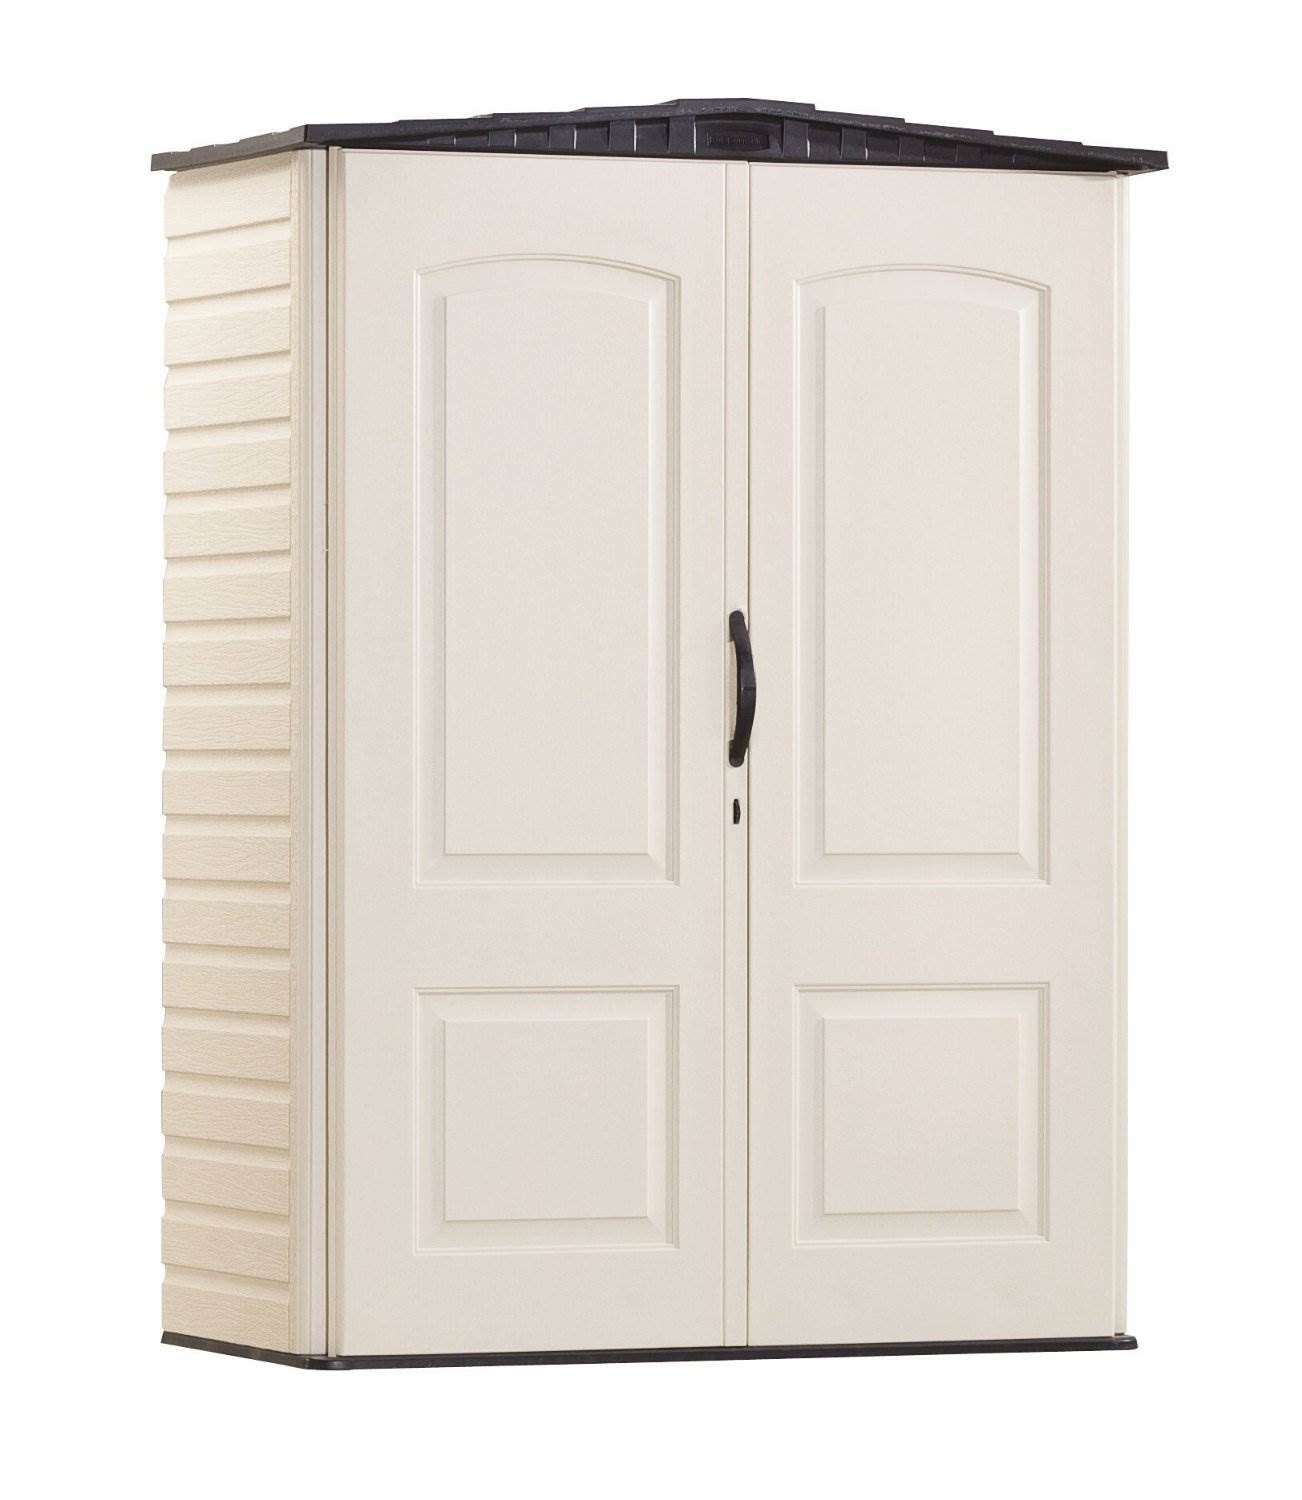 Rubbermaid 5 ft. x 2 ft. Vertical Shed - Small  78.5"L x 29.7"W x 14.4"H - image 1 of 3